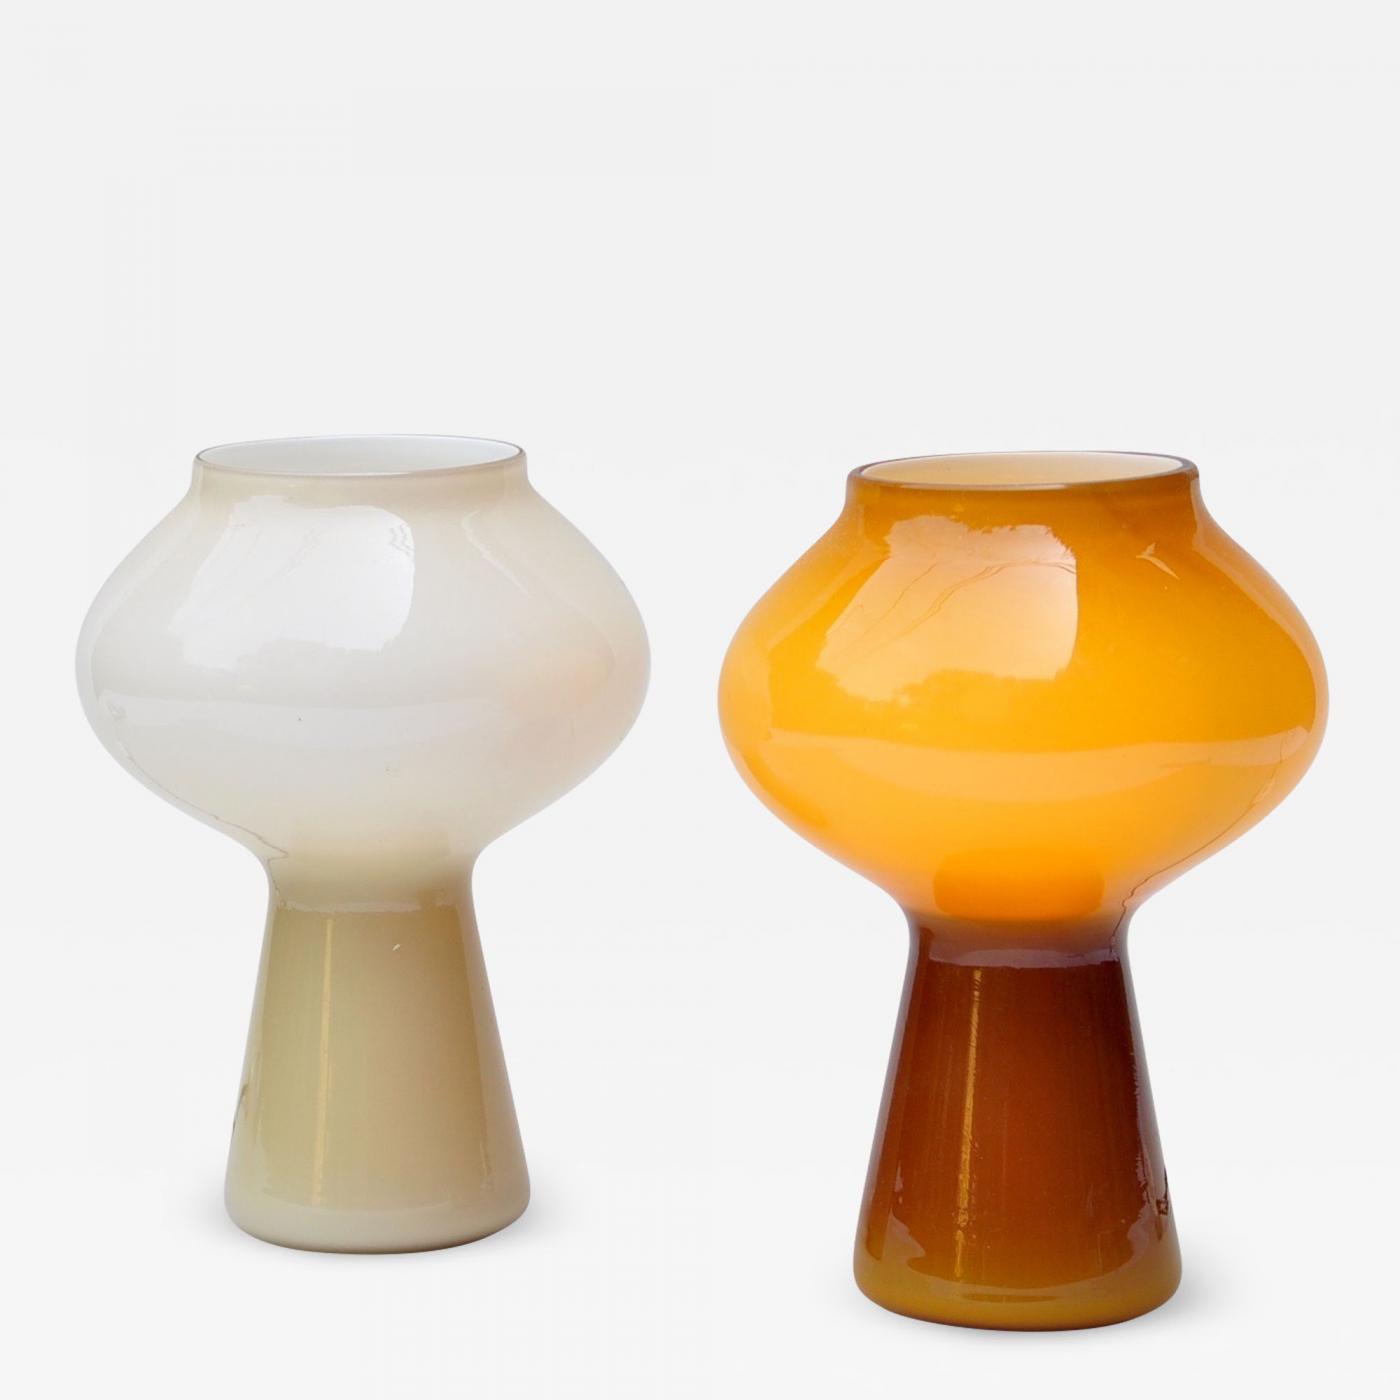 New Acquisitions Rayon Roskar Pair Of Fungo Table Lamps